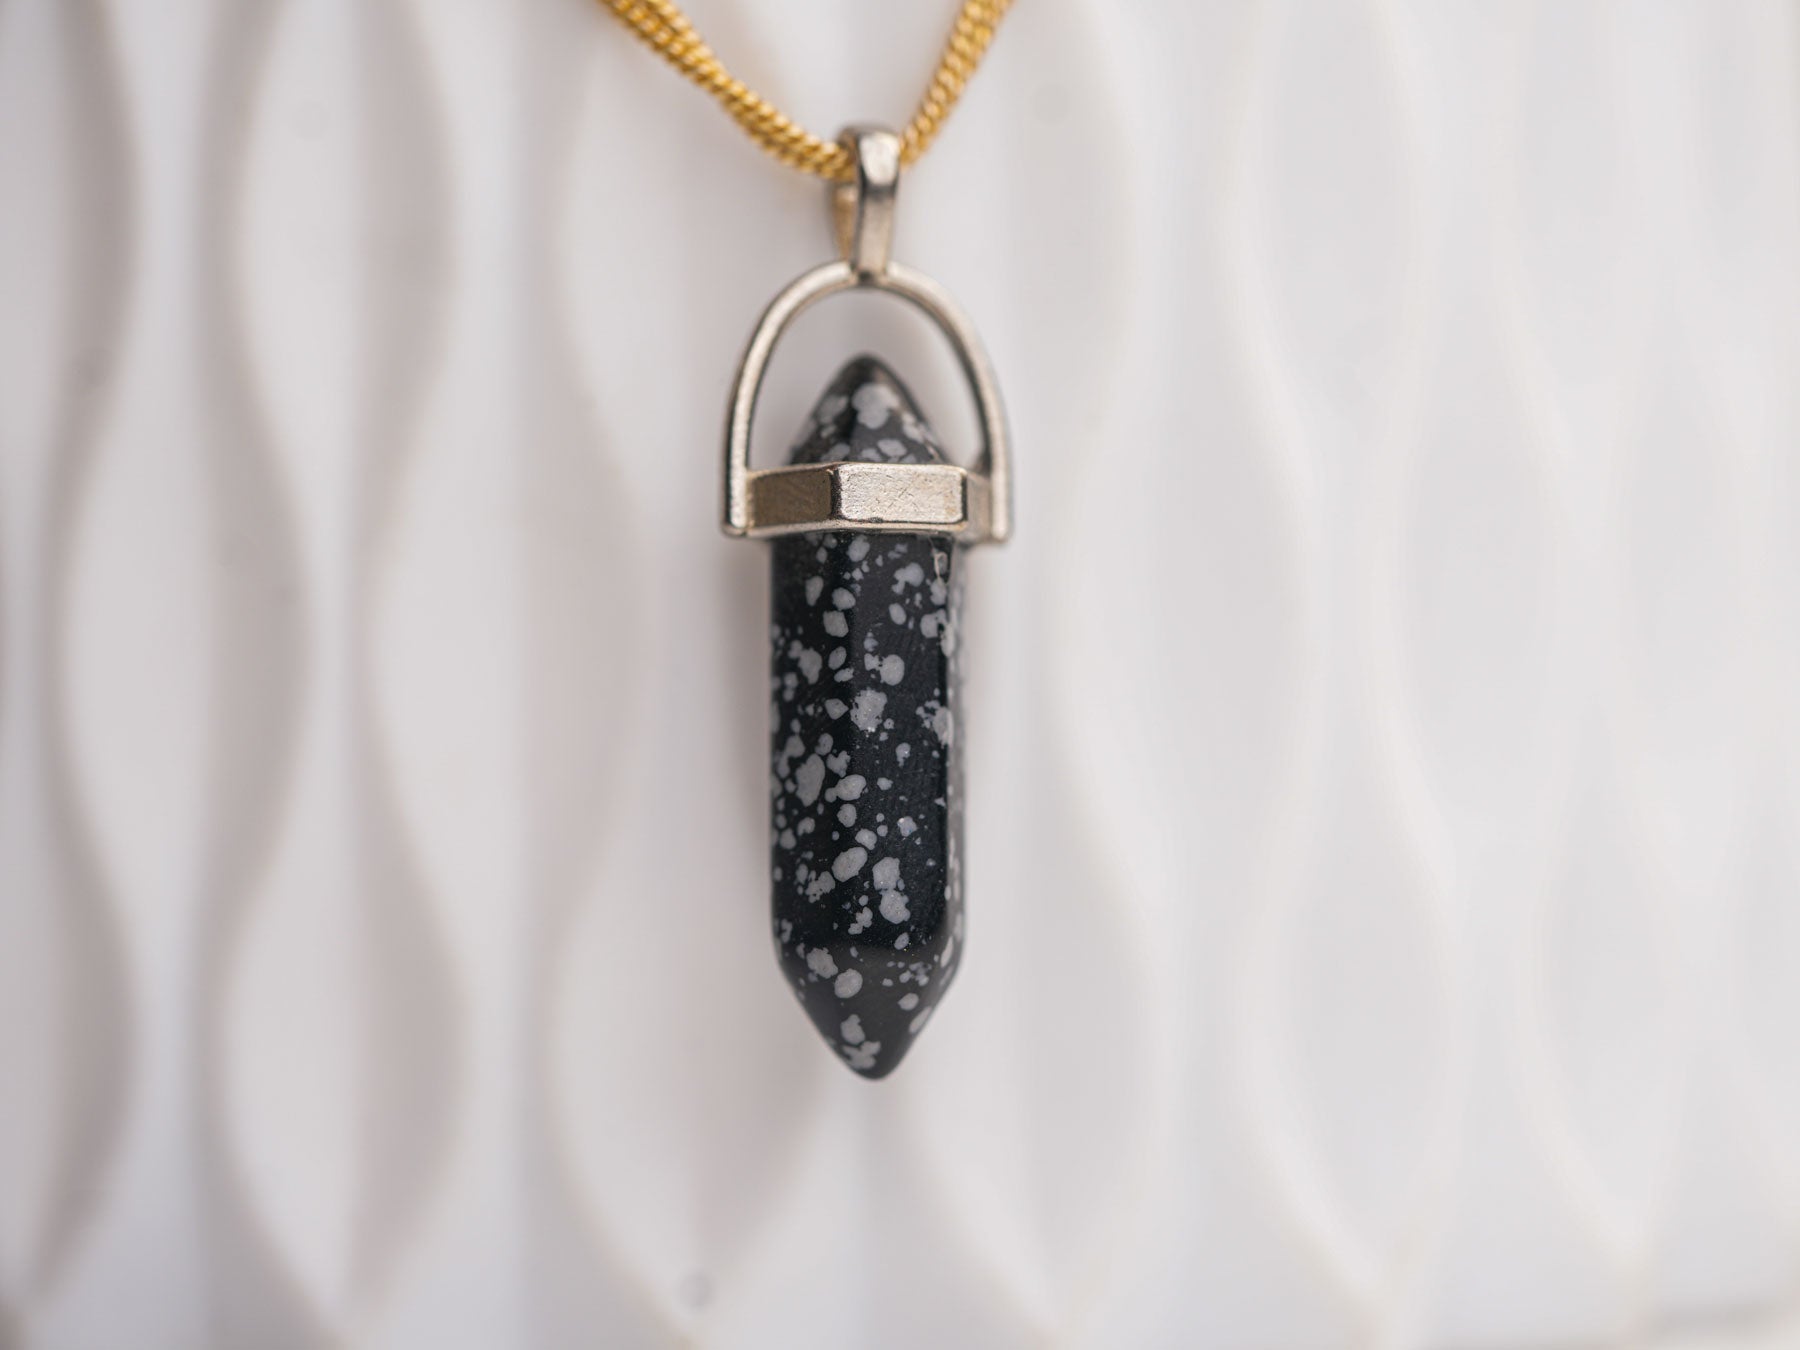 Snowflake Obsidian Wand Pendant: Embrace Transformation and Growth